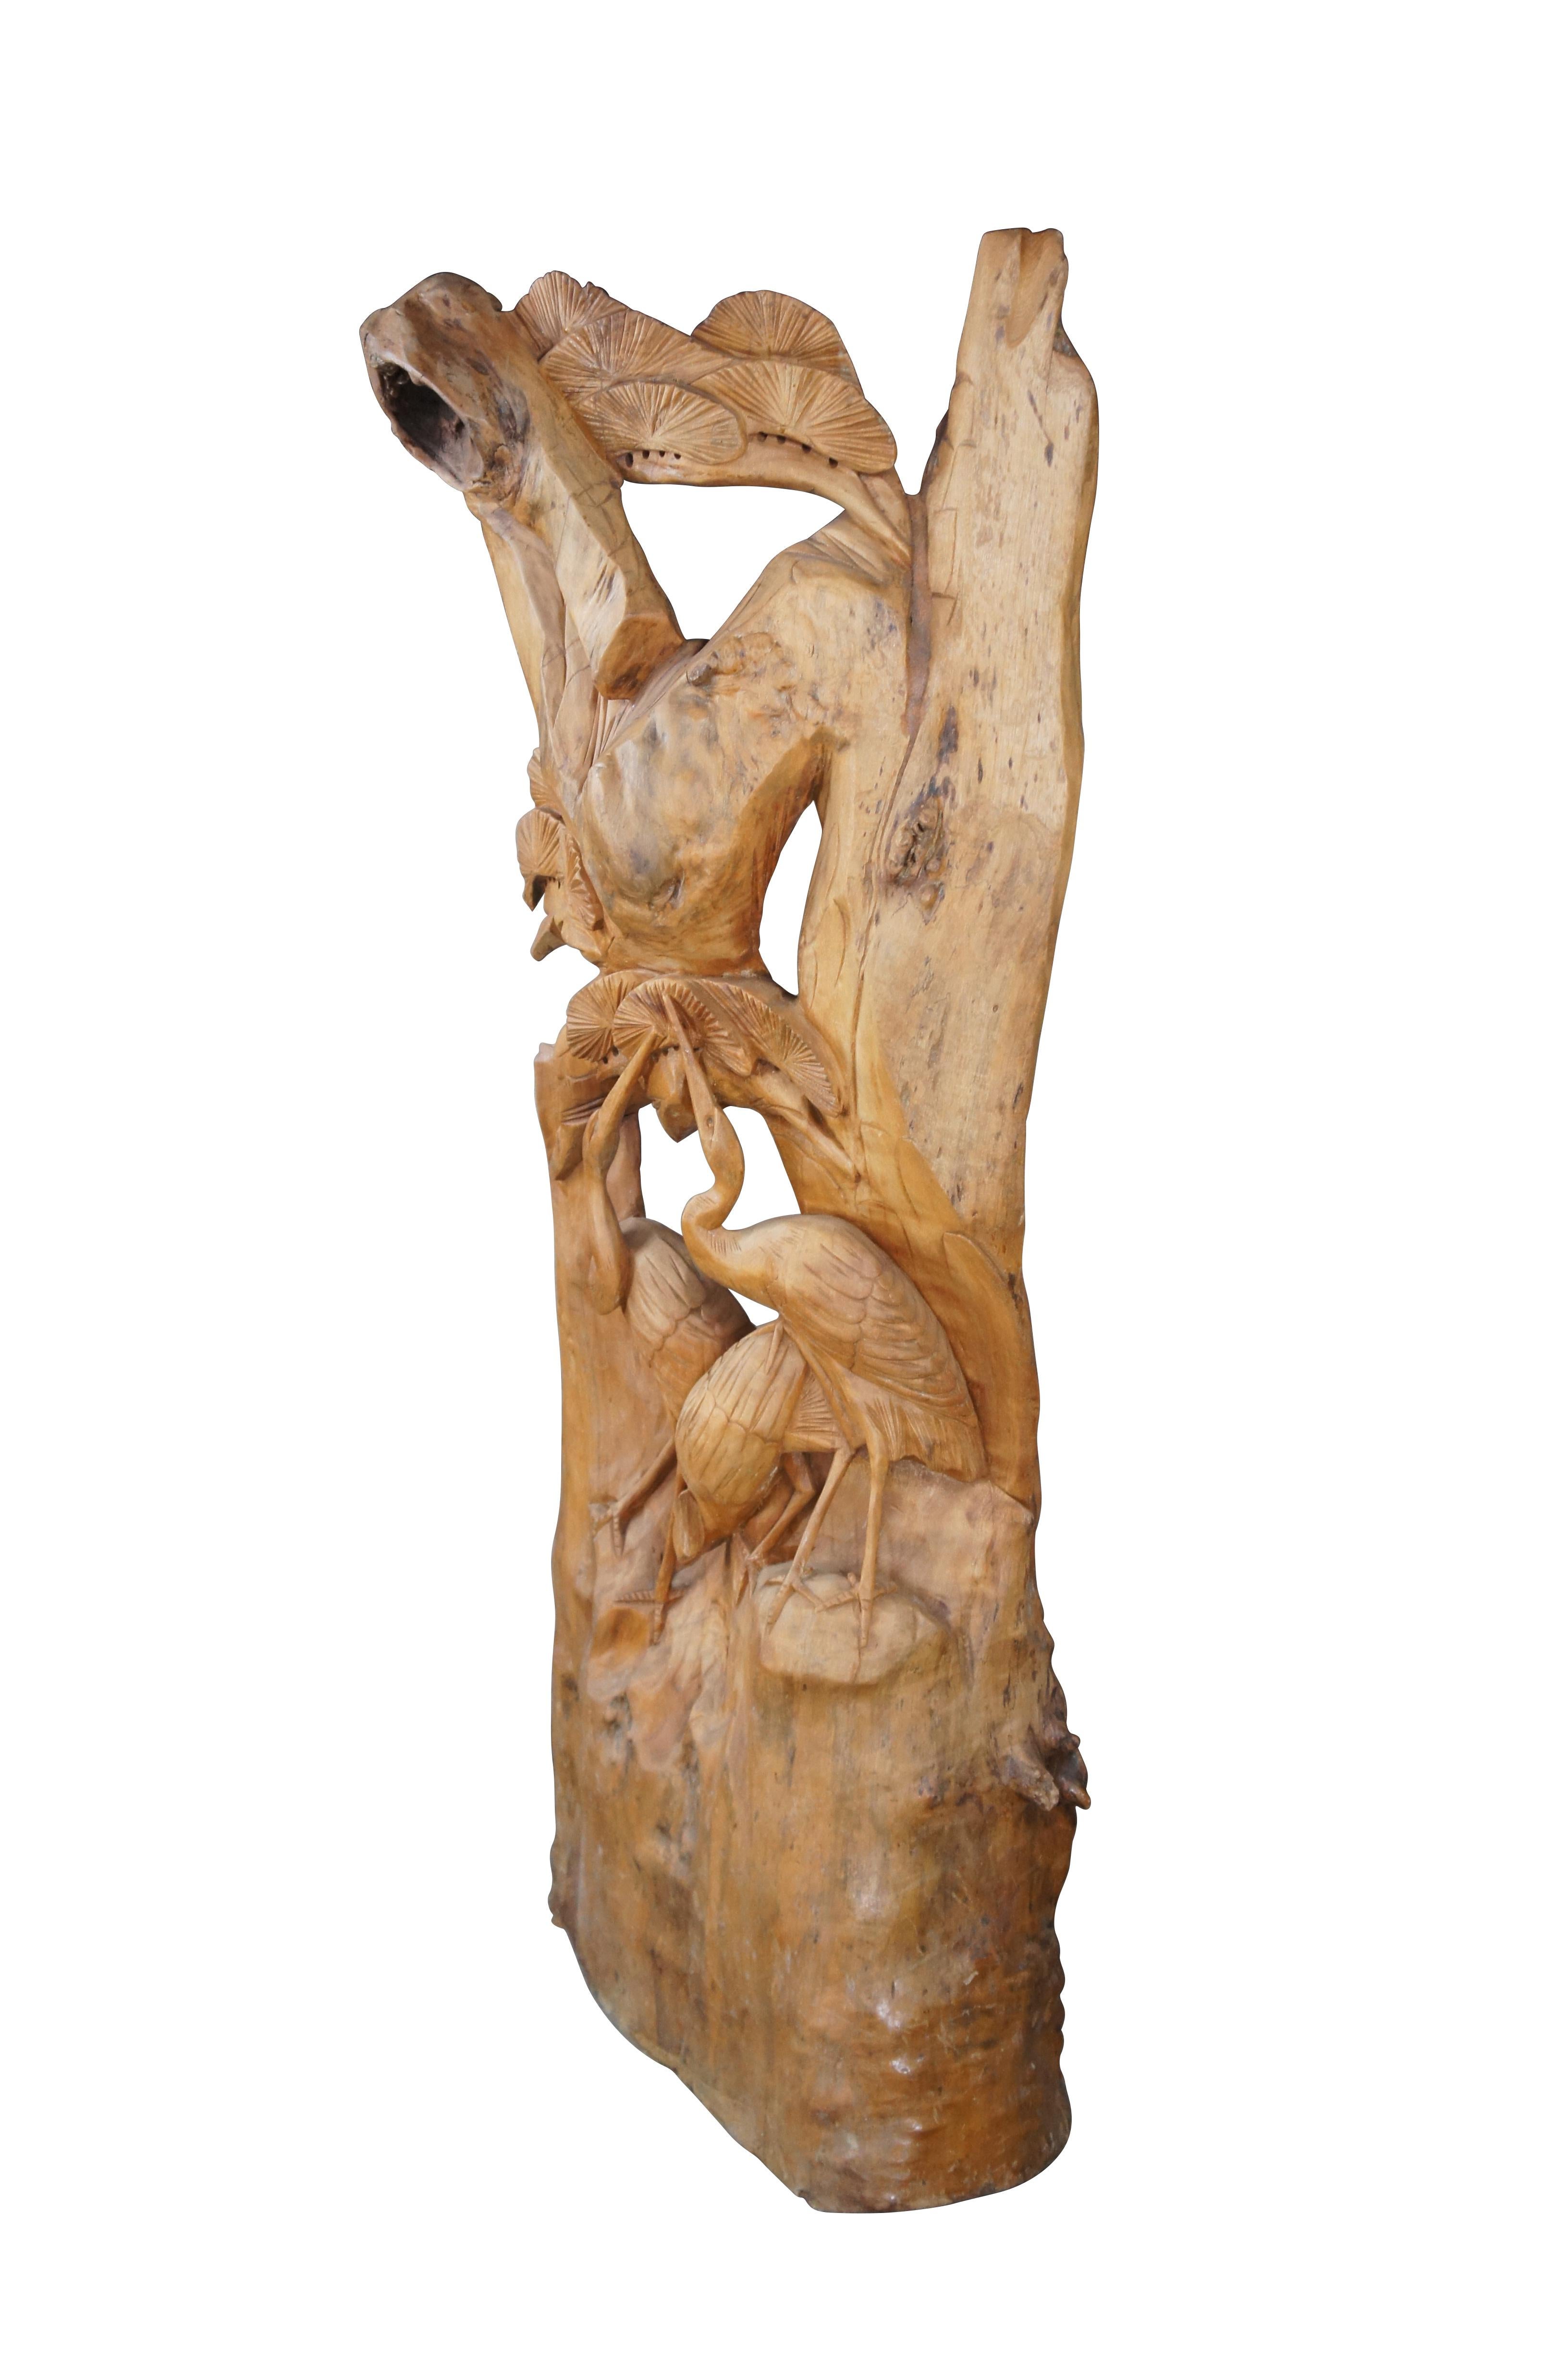 Hand Carved heron wildlife scene. The tree features three herons towards the base stretching upwards towards foliate. Beautifully designed with rustic patina     

Dimensions:
61.5